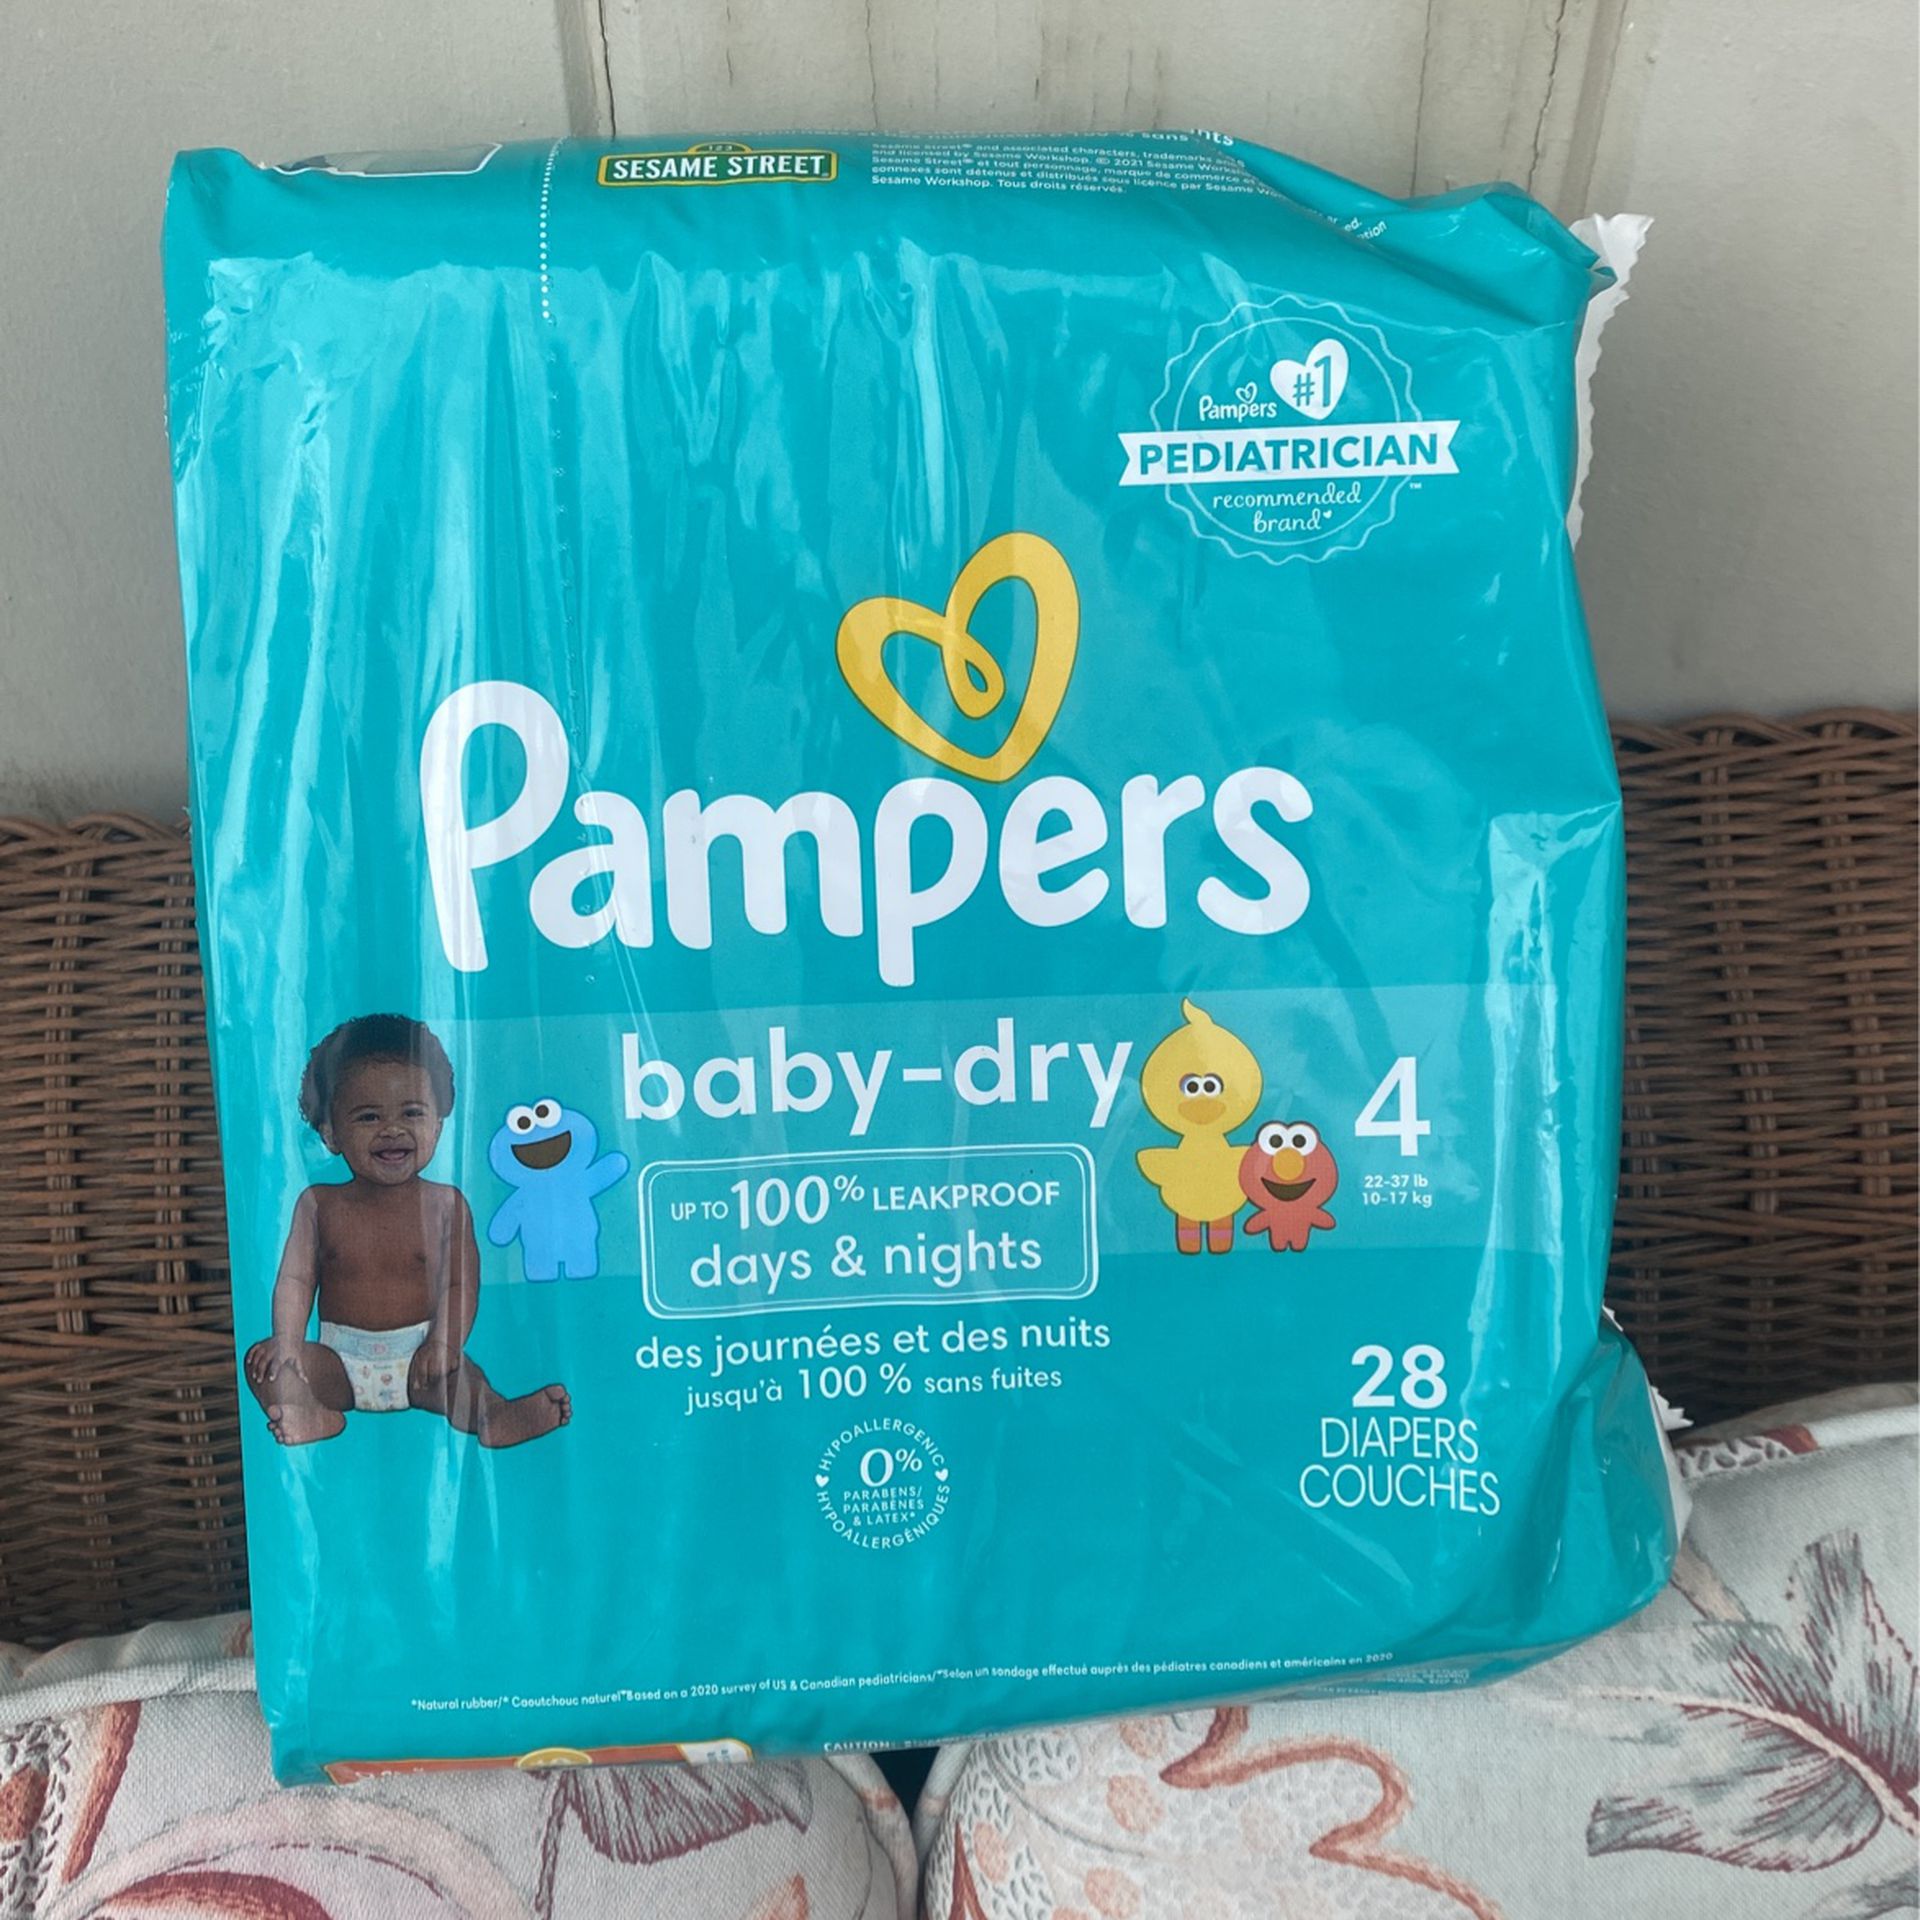 Pampers Baby-dry Diapers